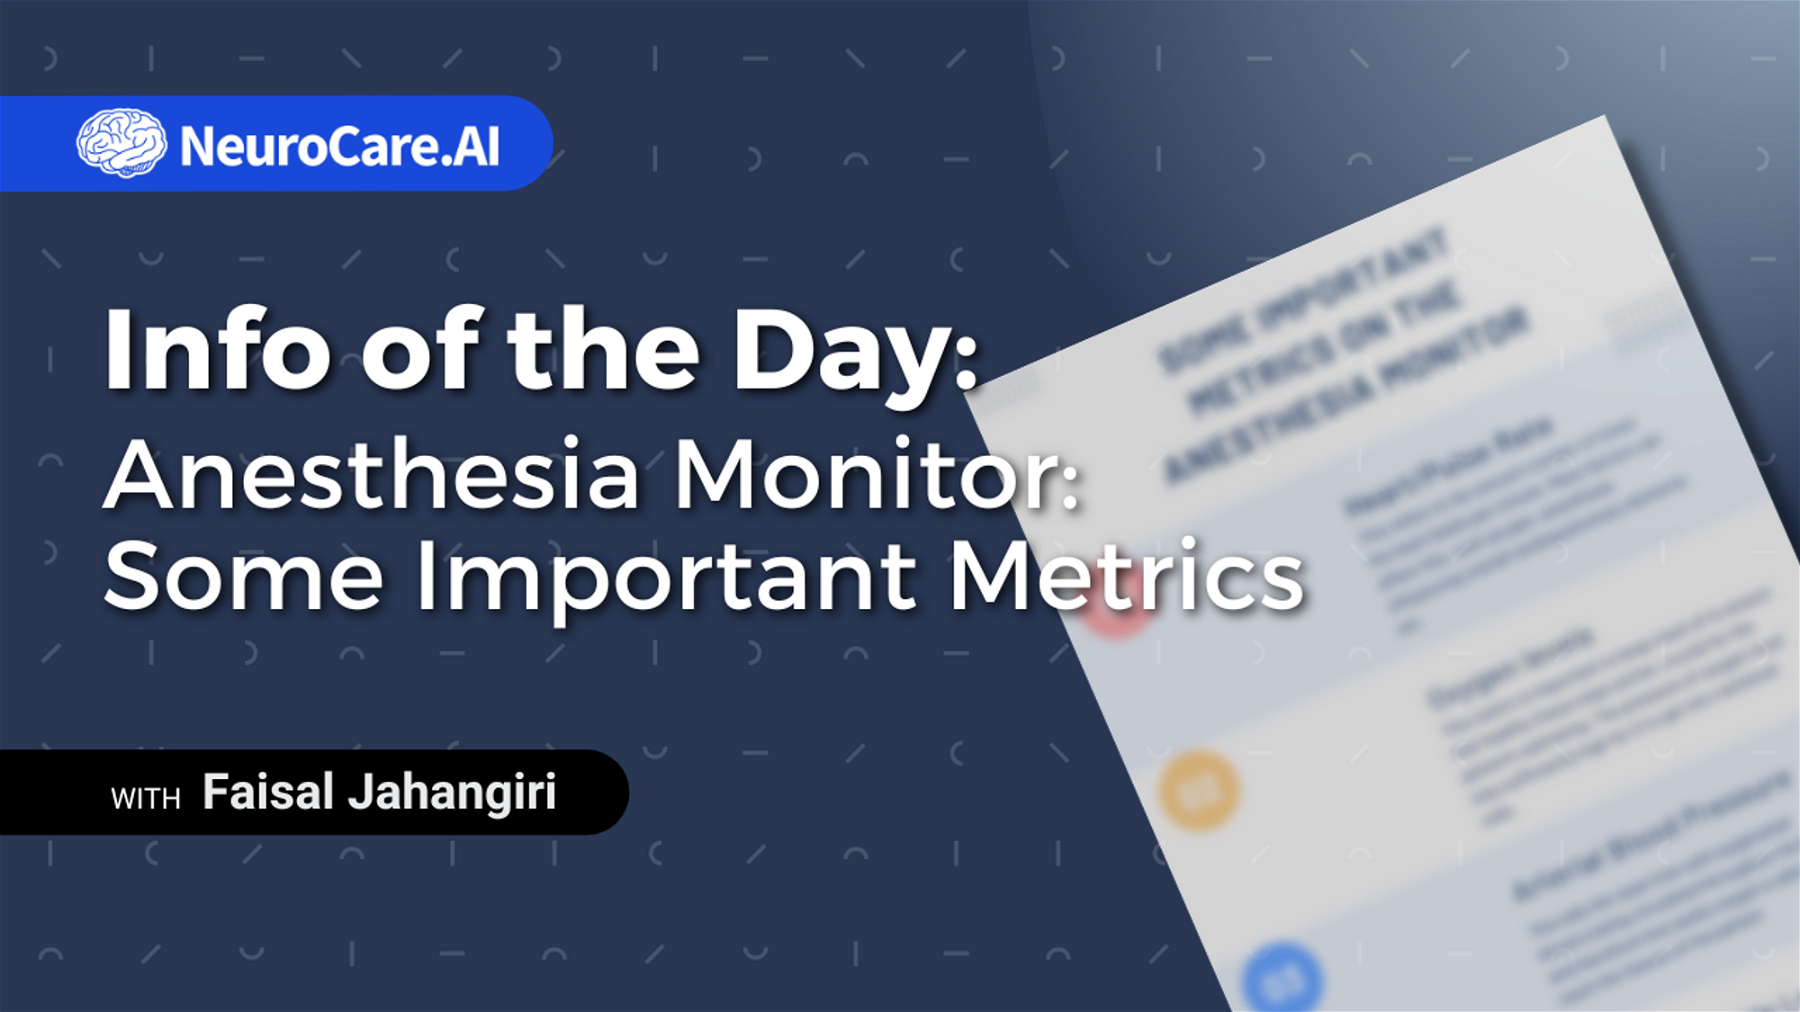 Info of the Day: "Anesthesia Monitor: Some Important Metrics"